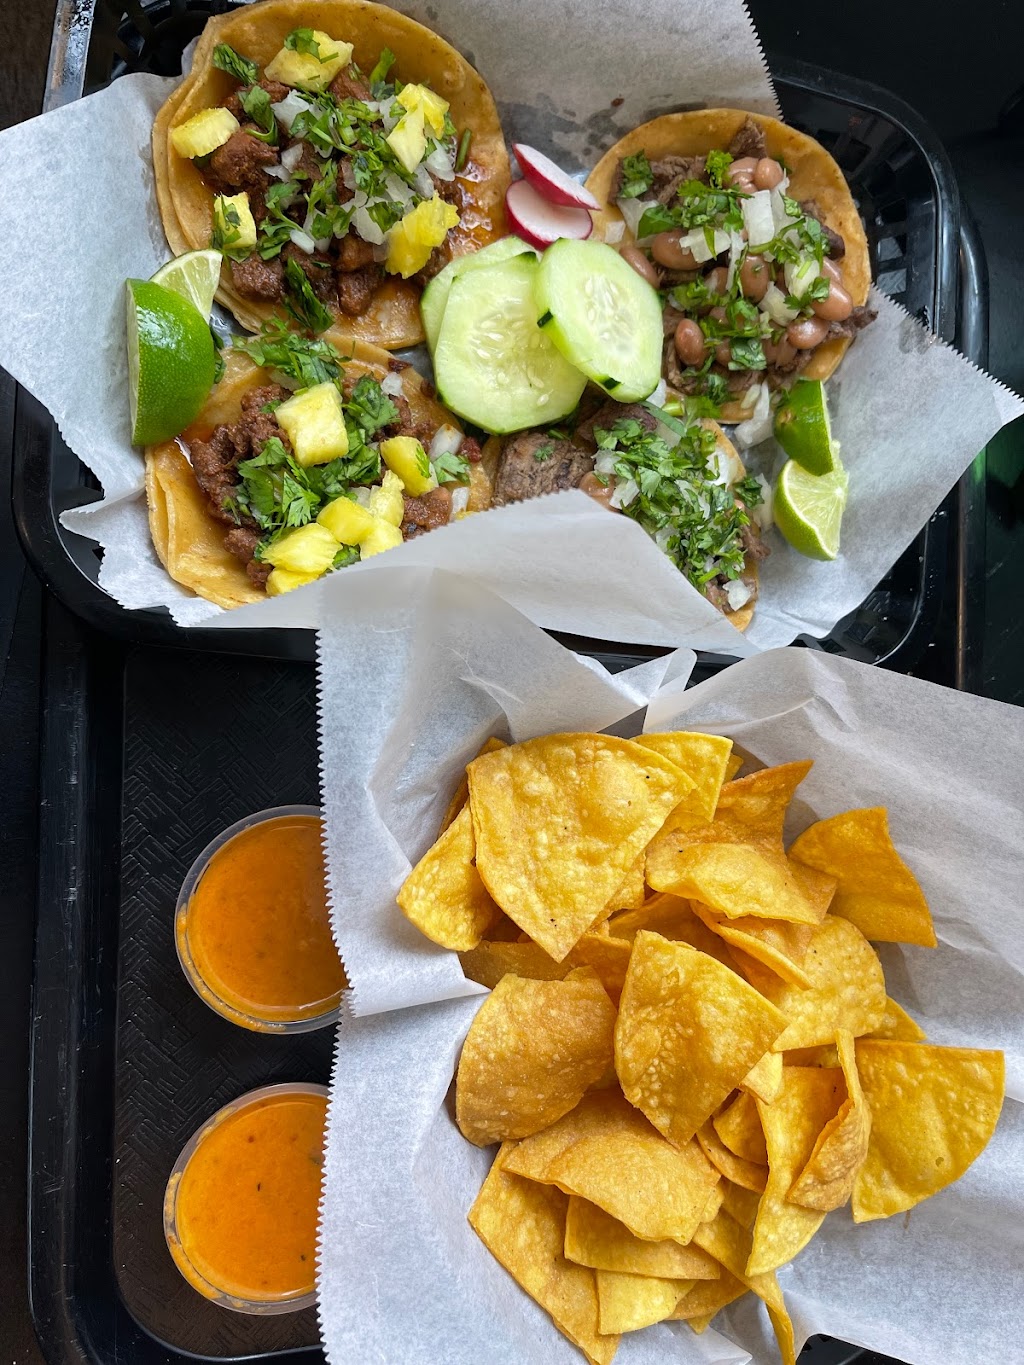 Taco & Co. | 1005 Center Dr, Pittsburg, CA 94565, USA | Phone: (925) 267-2220